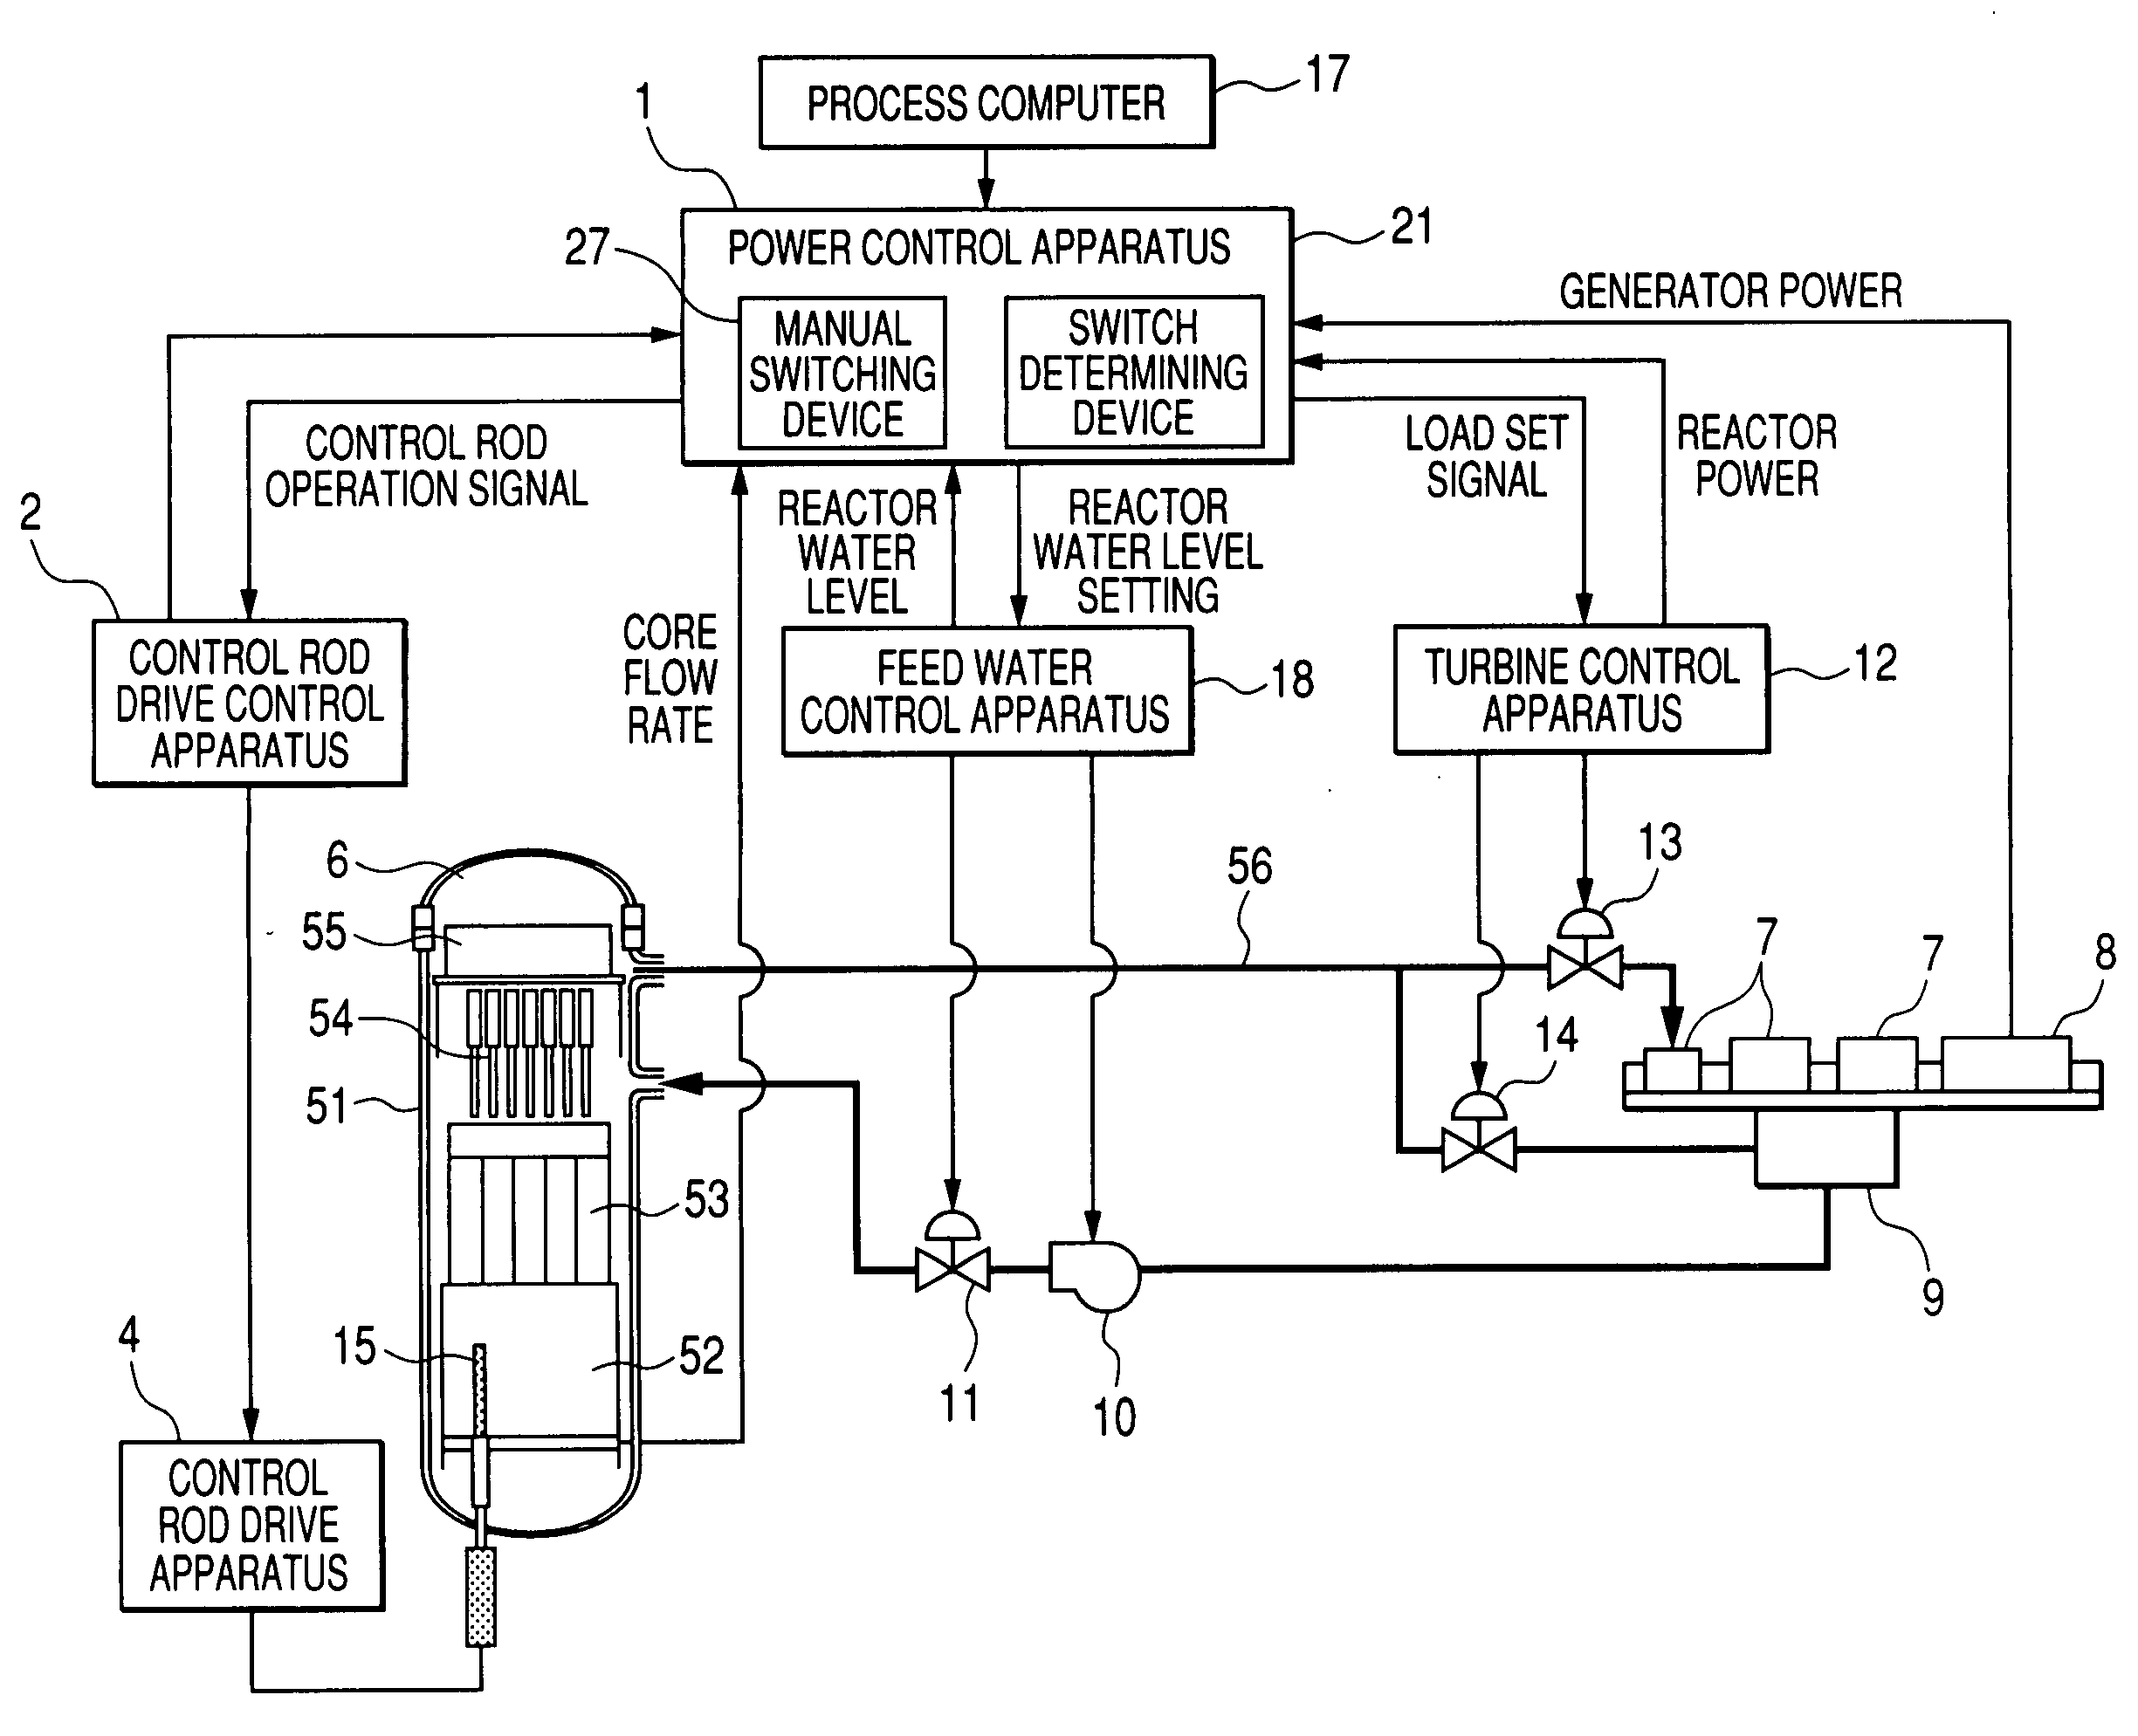 Reactor power control apparatus of a natural circulation boiling water reactor and a feed water control apparatus and nuclear power generation plant